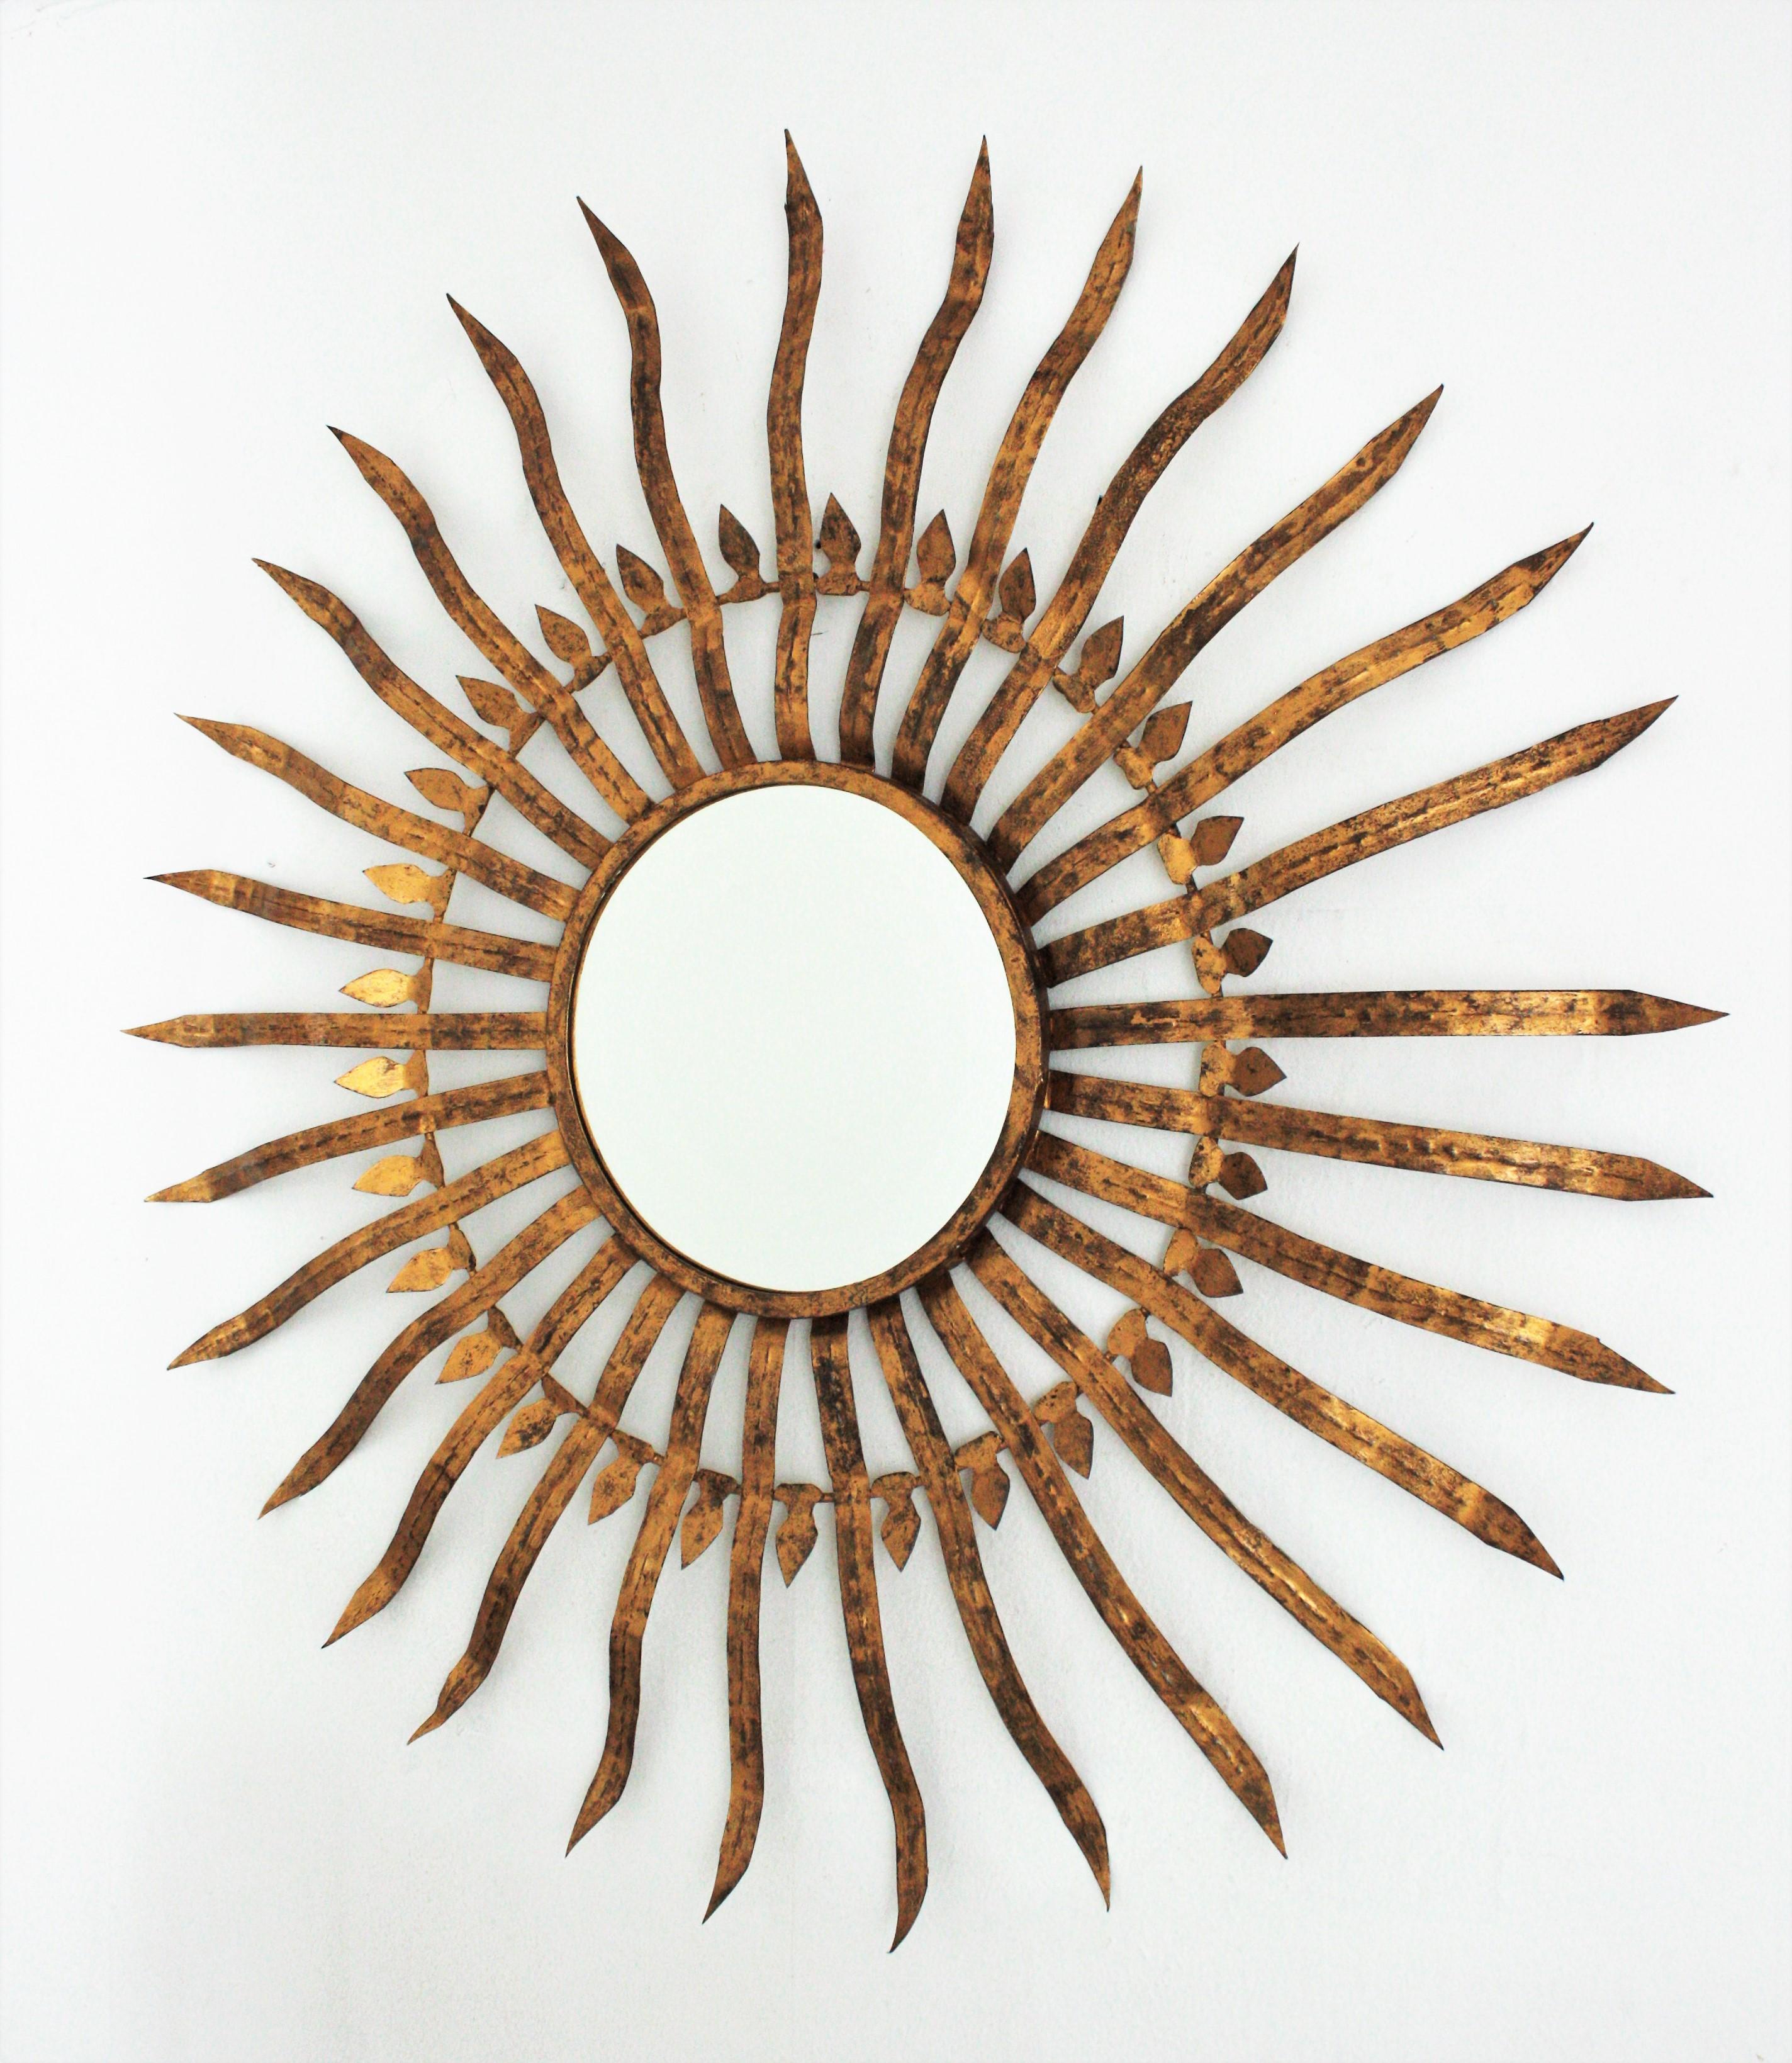 Outstanding Hollywood Regency gilt wrought iron convex sunburst mirror, Spain 1950s
Extra large size (40.15 inches) and convex glass mirror. It has a terrific aged patina with gold leaf gilding.
This magnificent hand-hammered sunburst wall mirror